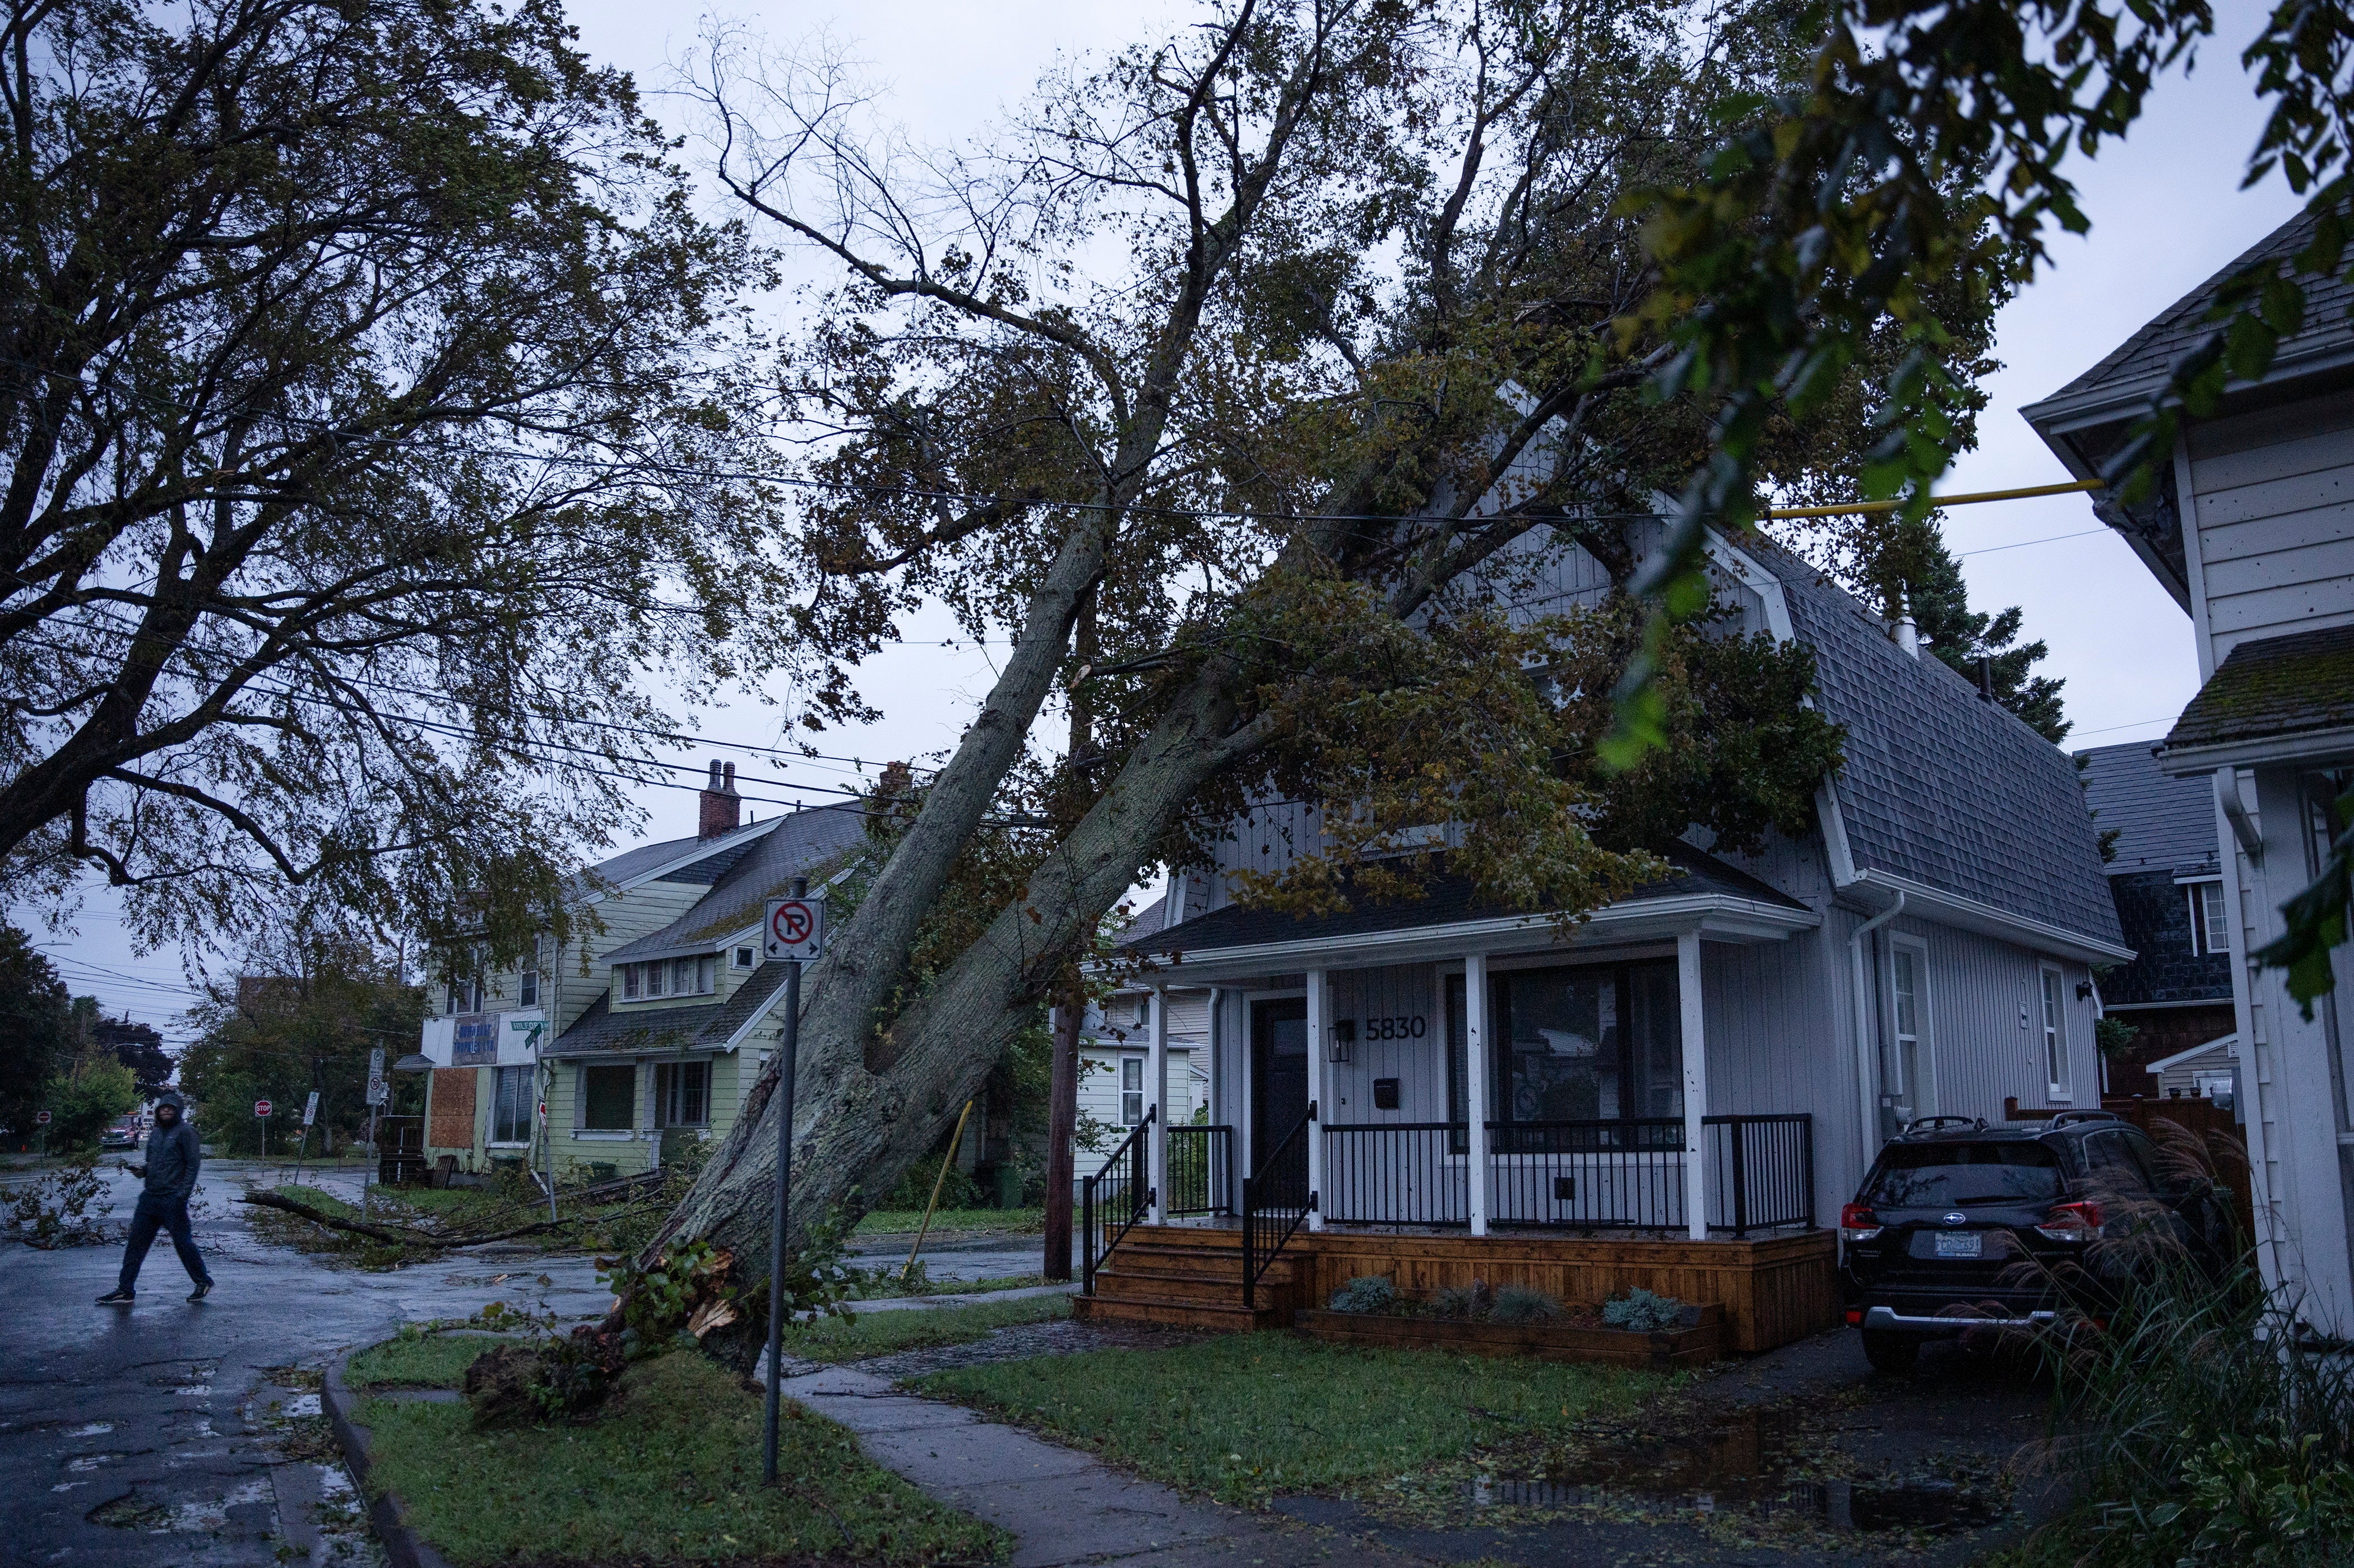 A tree collapsed onto a home in Halifax, Nova Scotia on Saturday, September 24. (Photo: Darren Calabrese /The Canadian Press, AP)